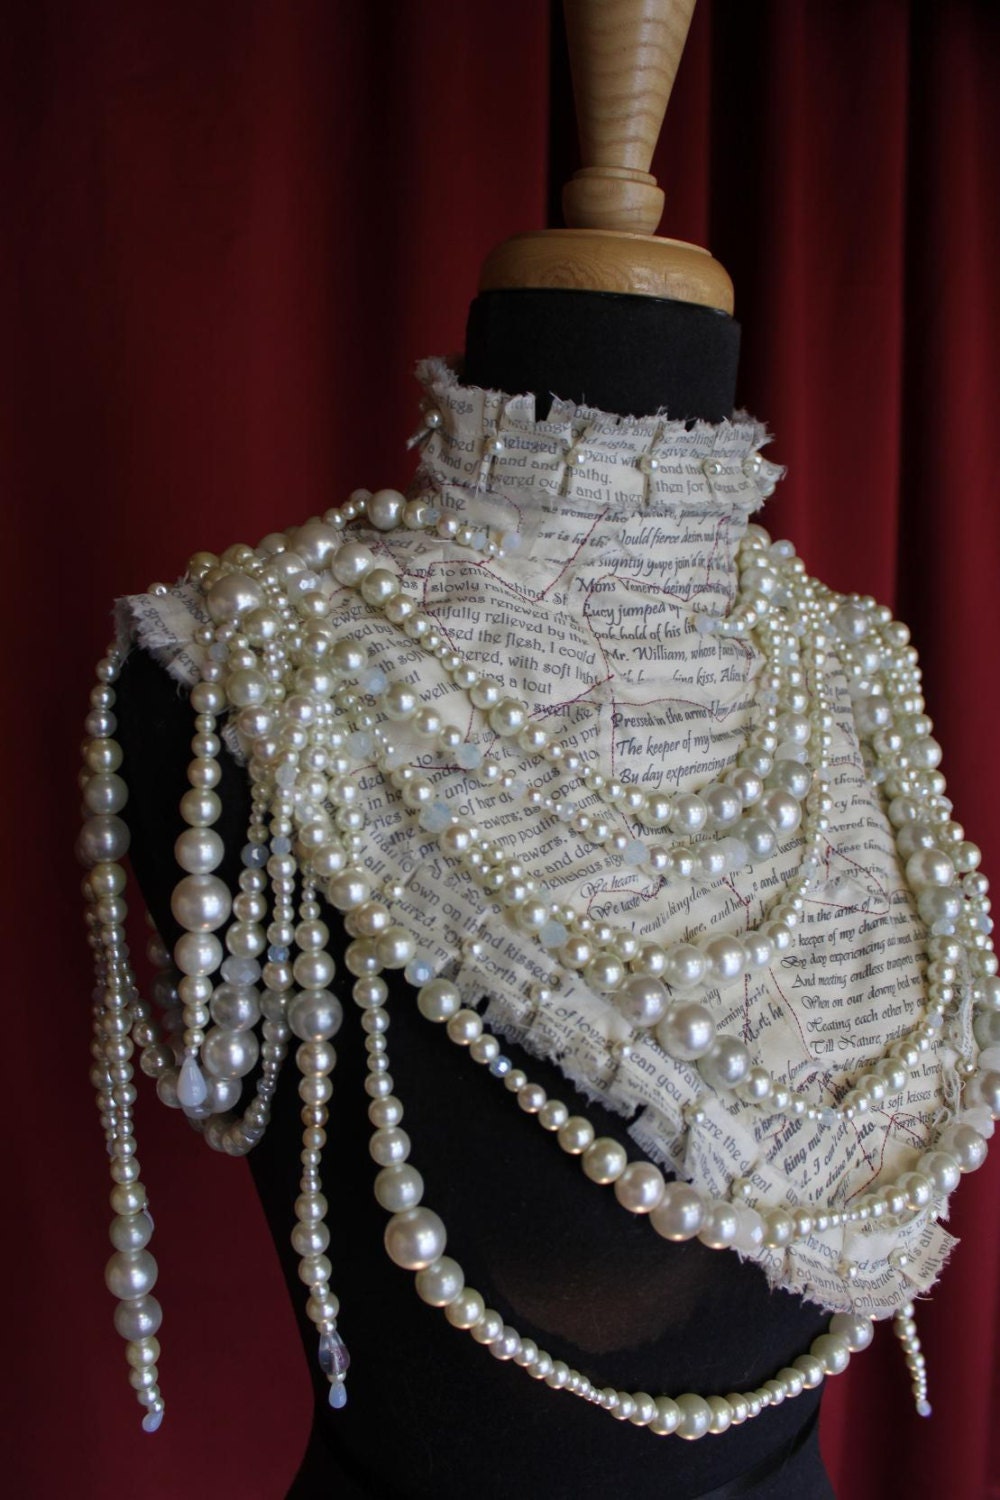 The Pearl Necklace Silk Collar of Erotic Stories Decorated